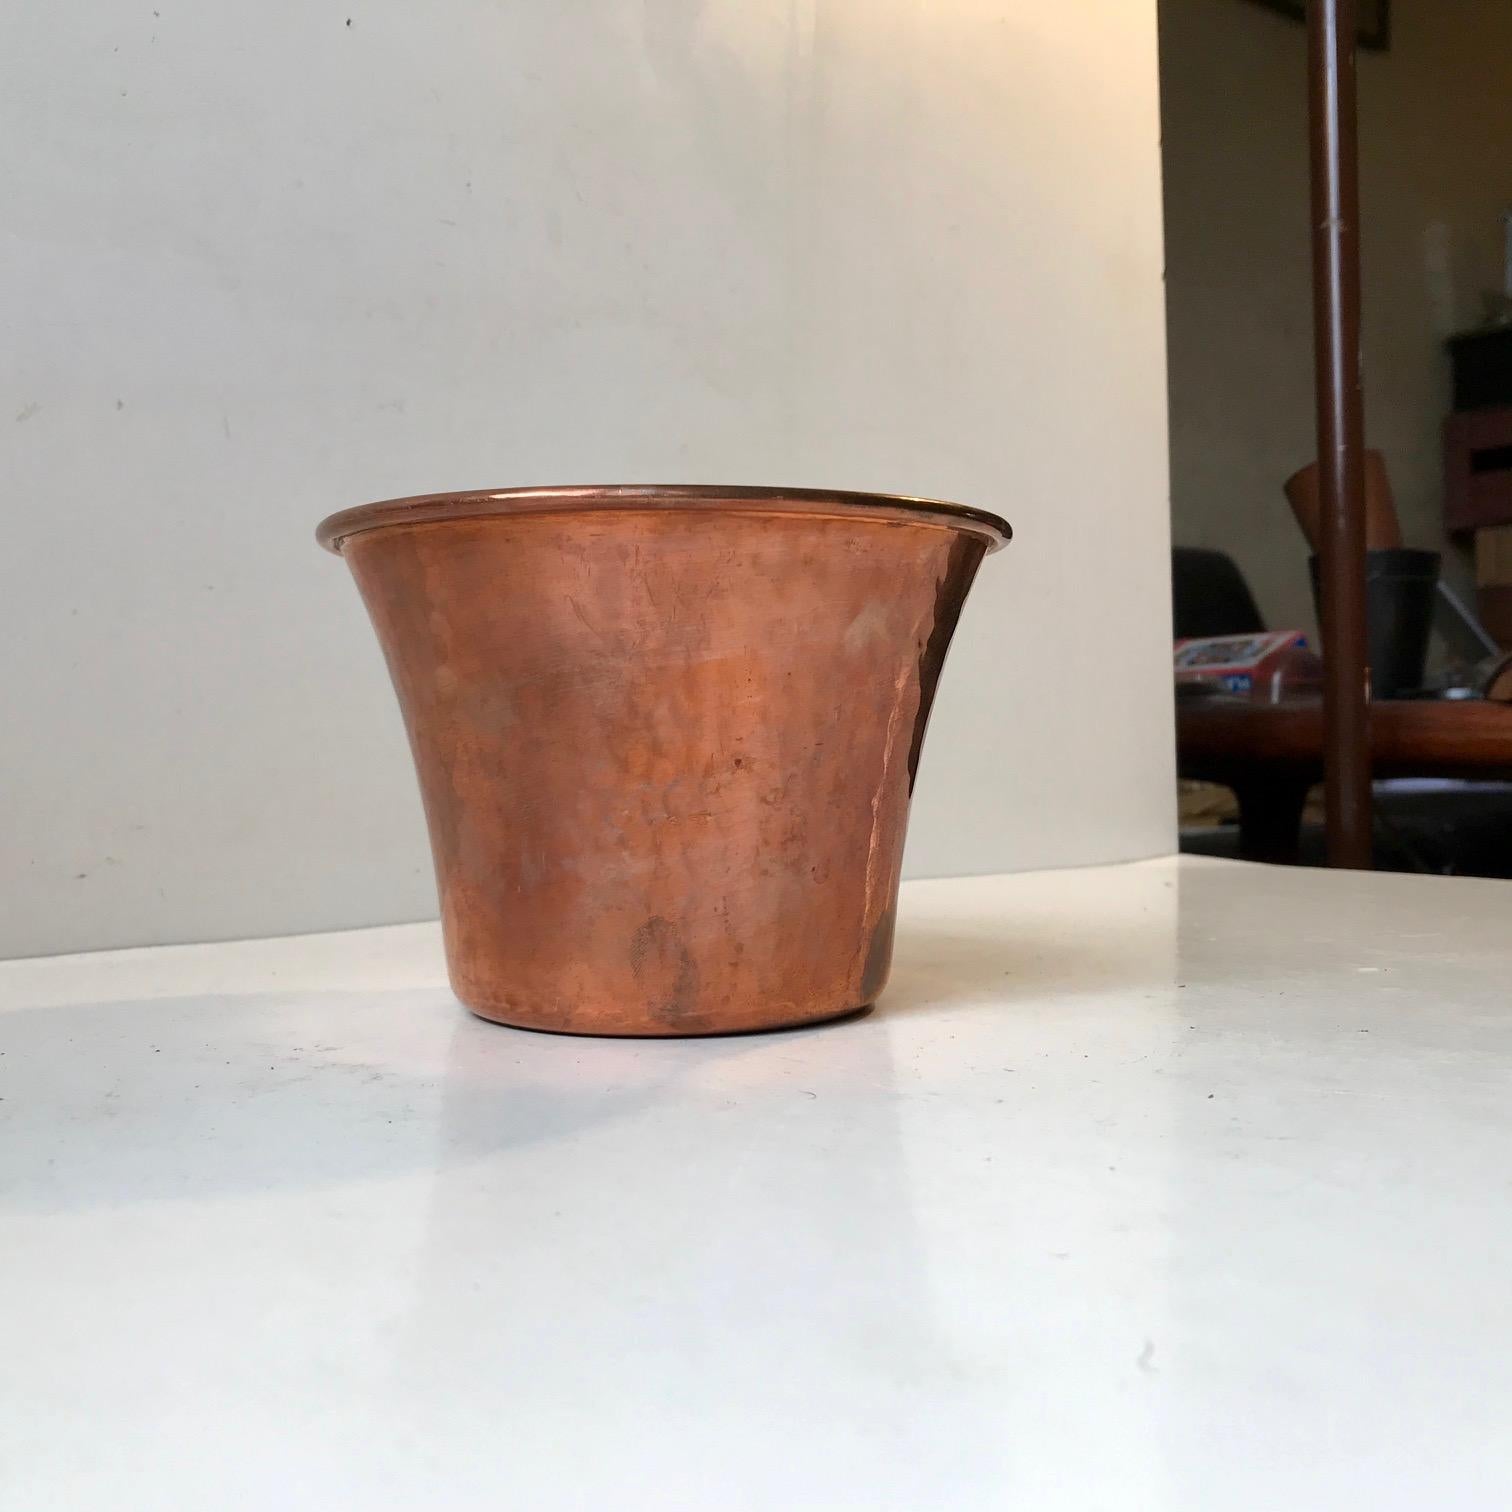 Ornate planter in solid copper. The soft hammering done to the planter mimics lizard skin. It was designed and manufactured by Stockli Nestal in Switzerland during the 1950s.